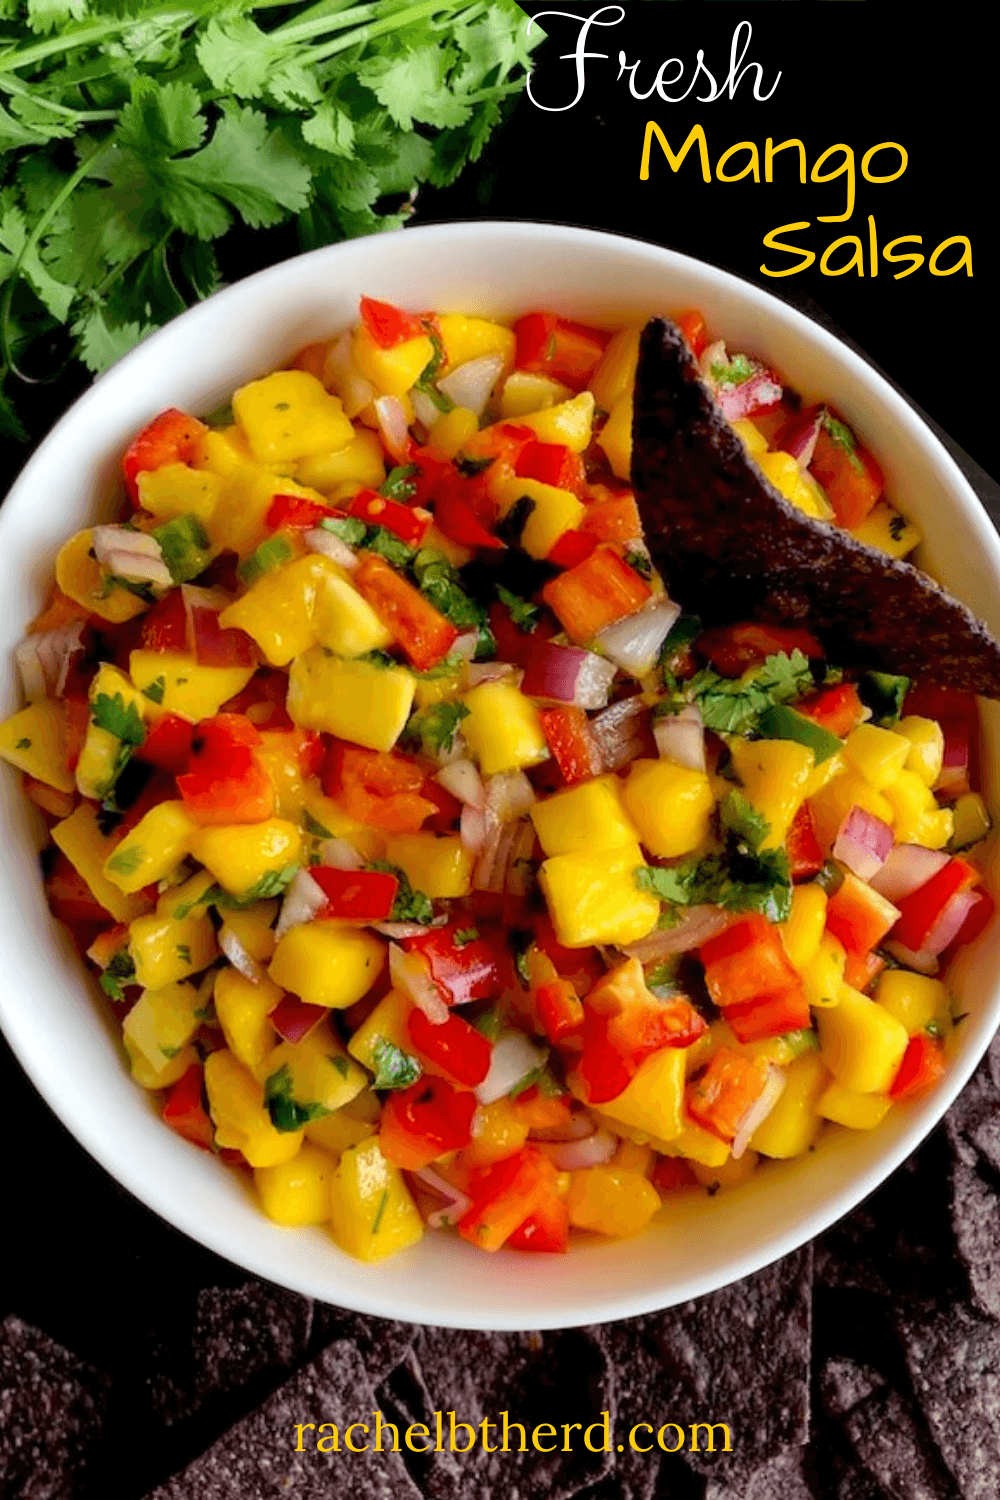 Mango salsa with chips